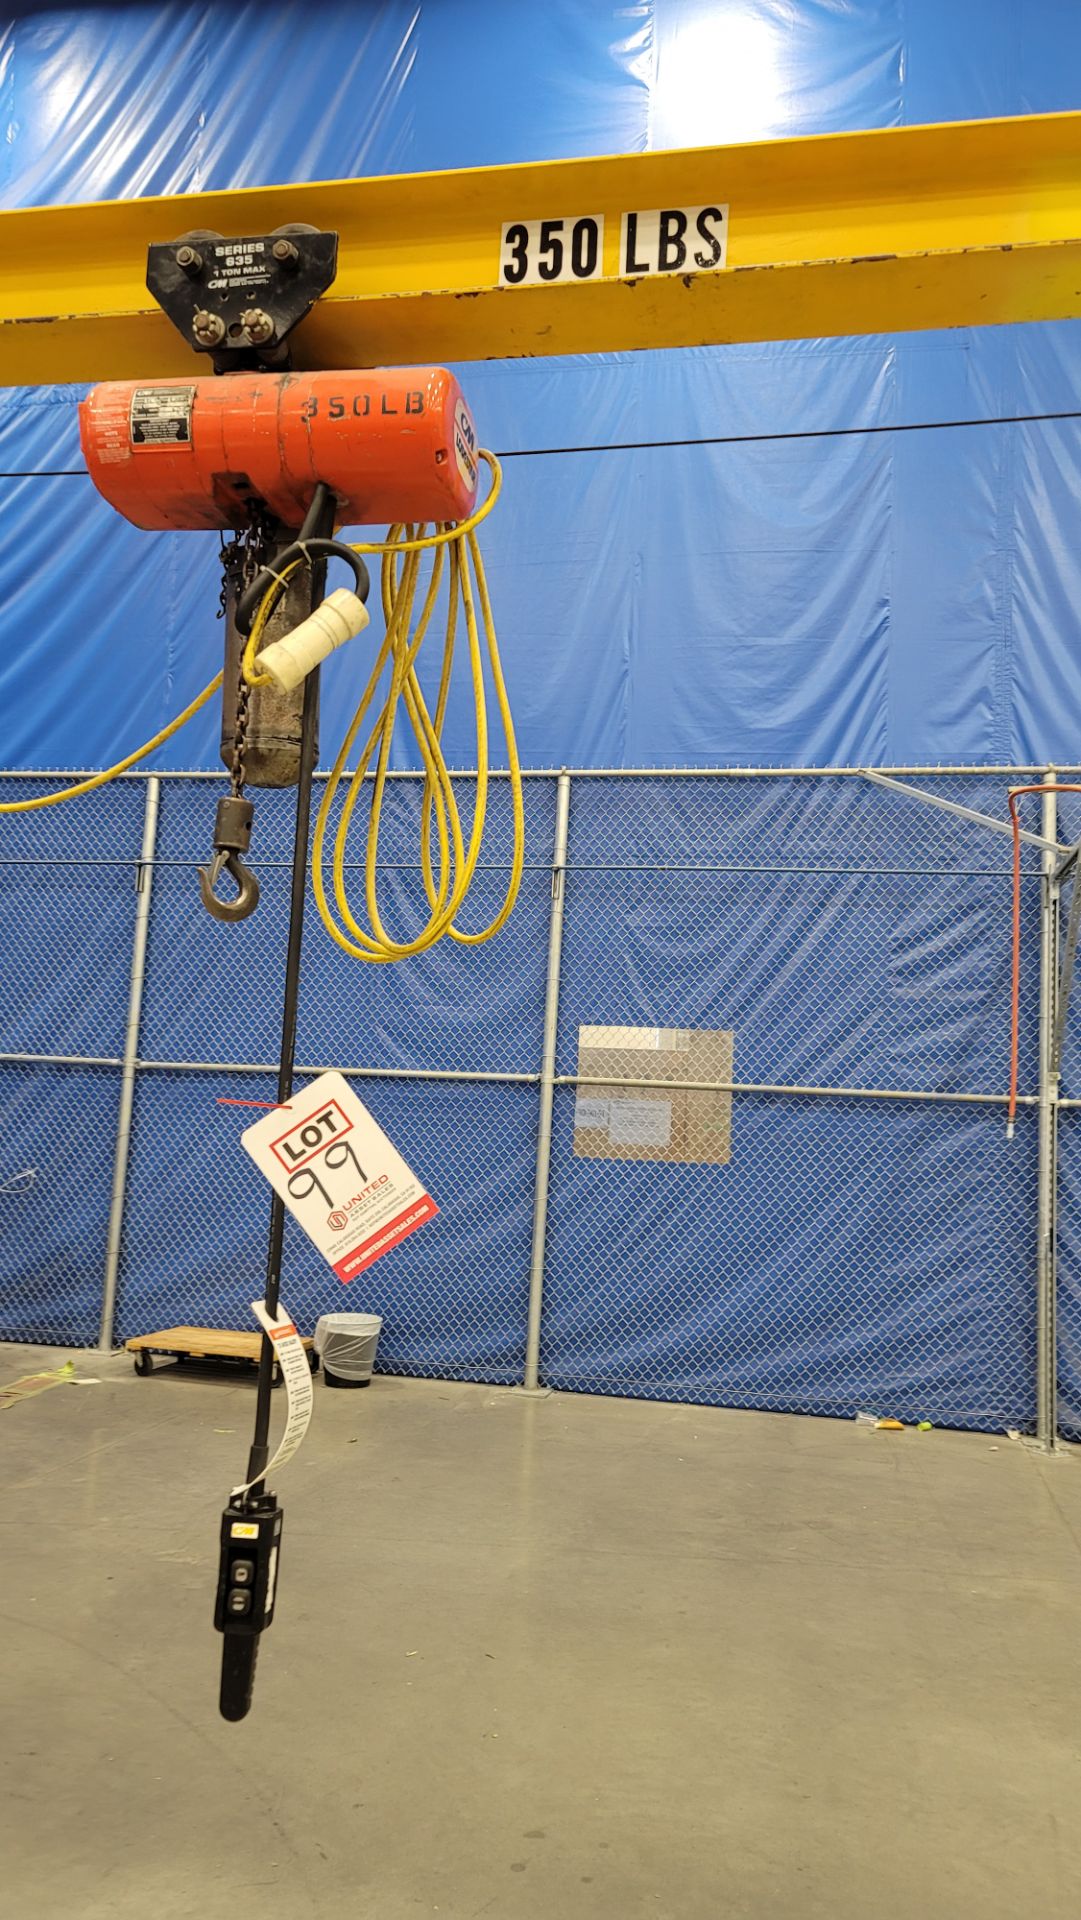 CM 1/2 TON ELECTRIC CHAIN HOIST, W/ PENDANT CONTROL, INCLUDES FREE-STANDING MONORAIL, TROLLEY (